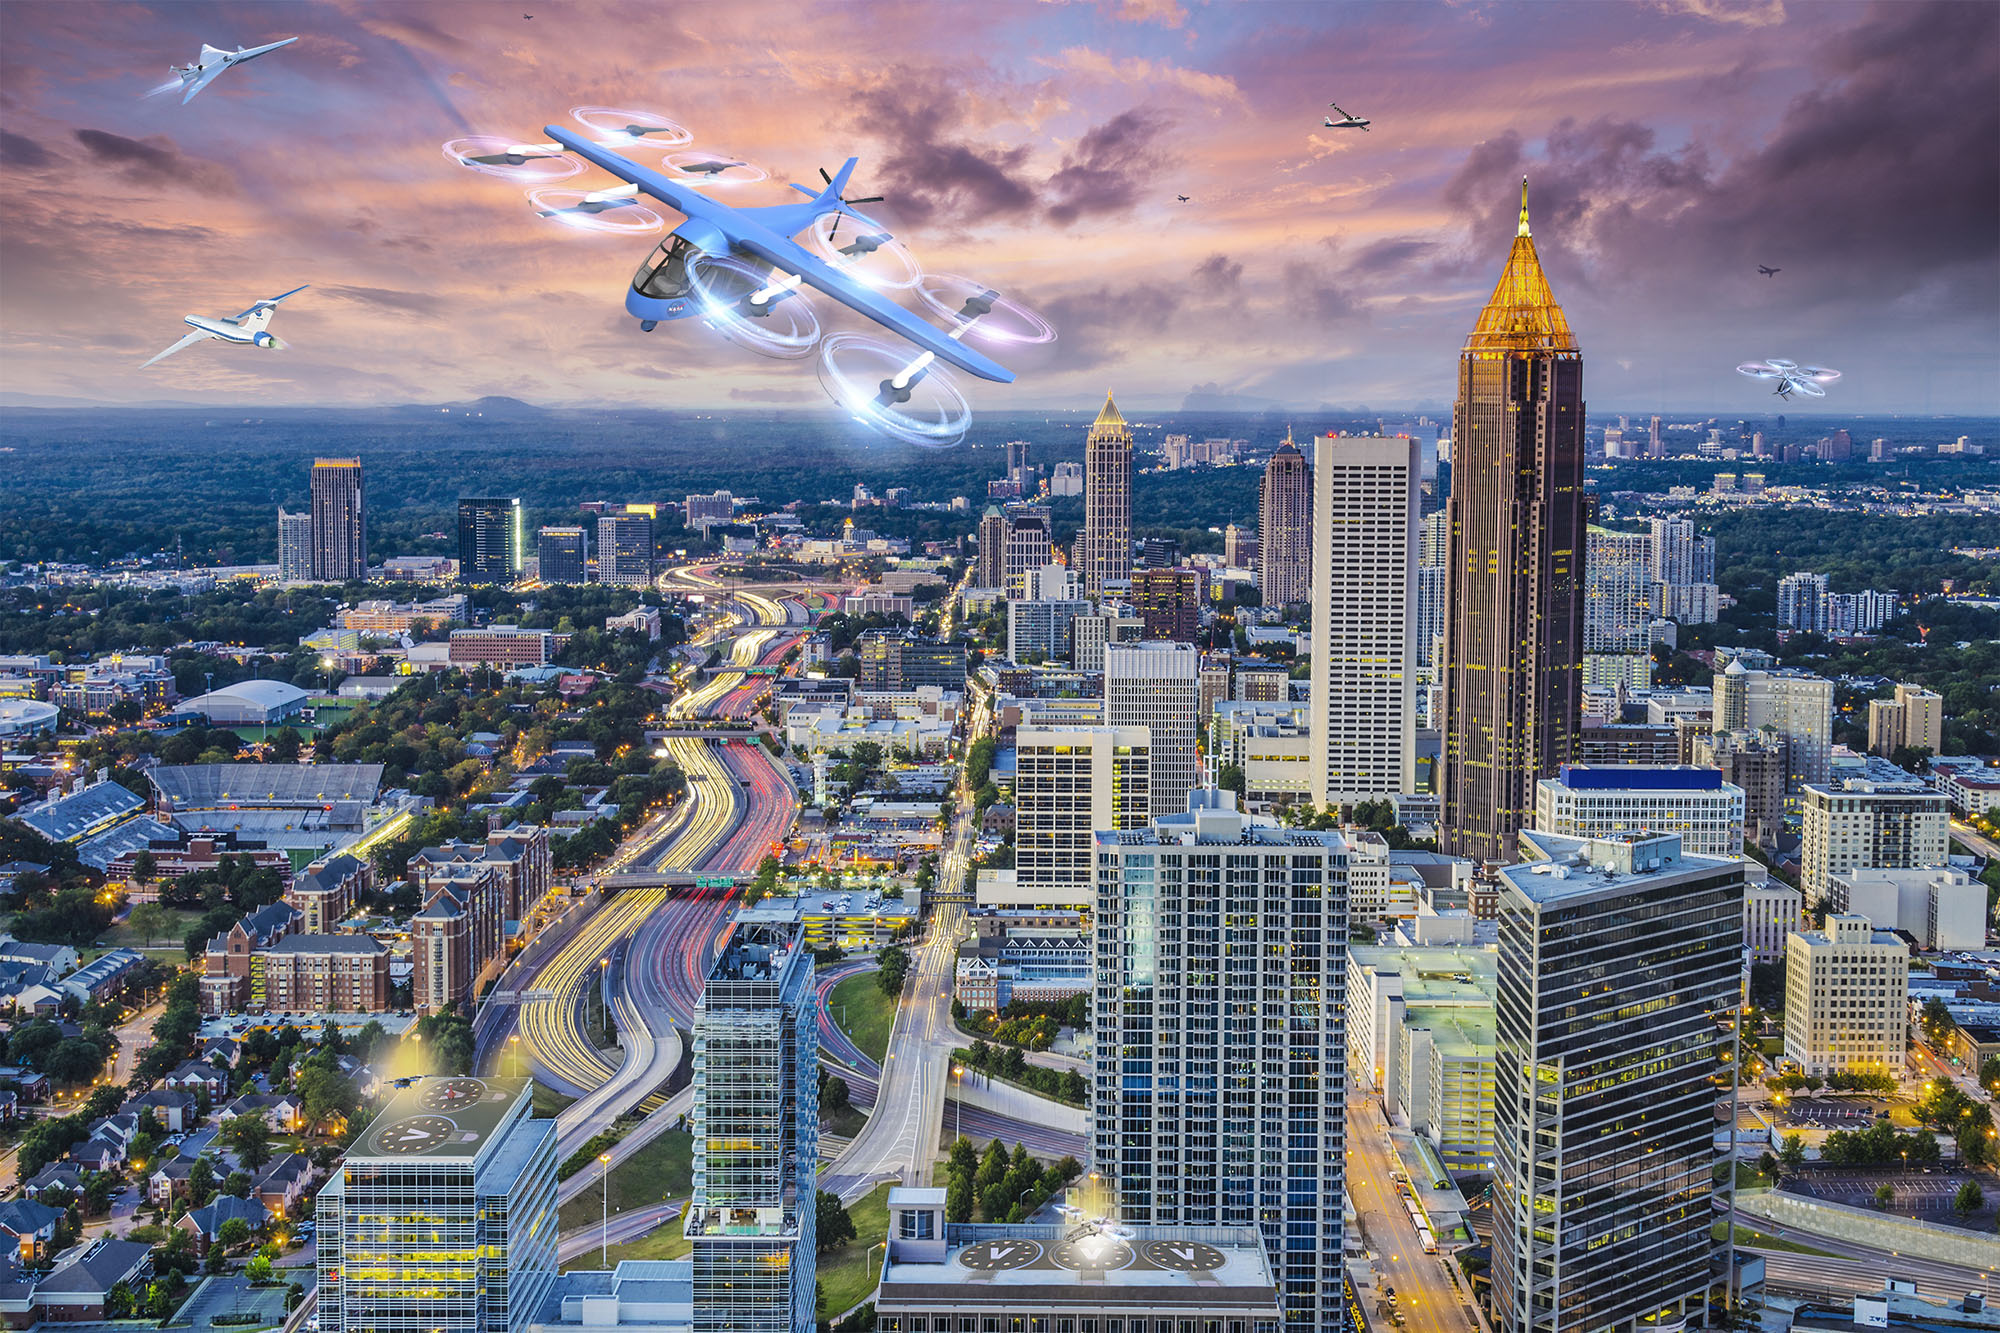 Drones and flying car buzzing by downtown Atlanta, part of a speculative NASA project